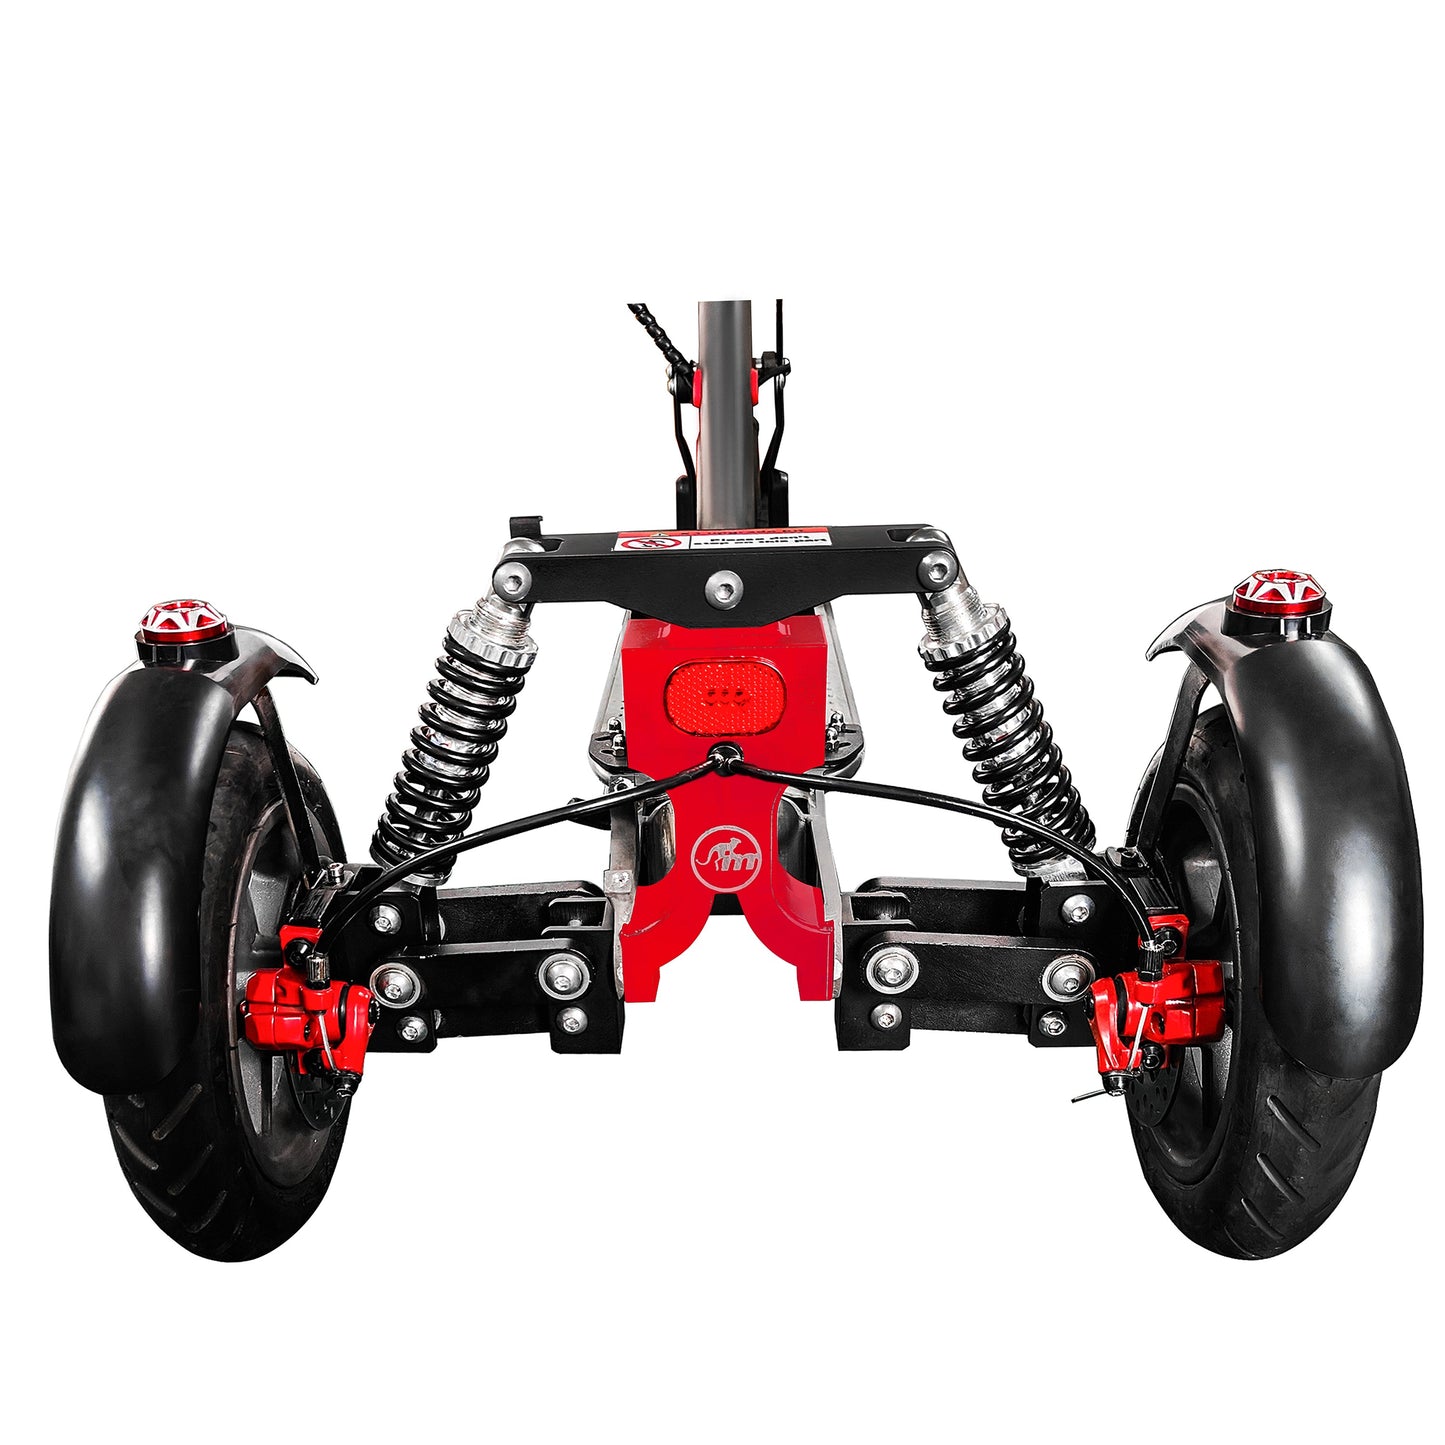 Monorim X3 upgrade kit to be Three wheels special for xiaomi m365 scooter frames